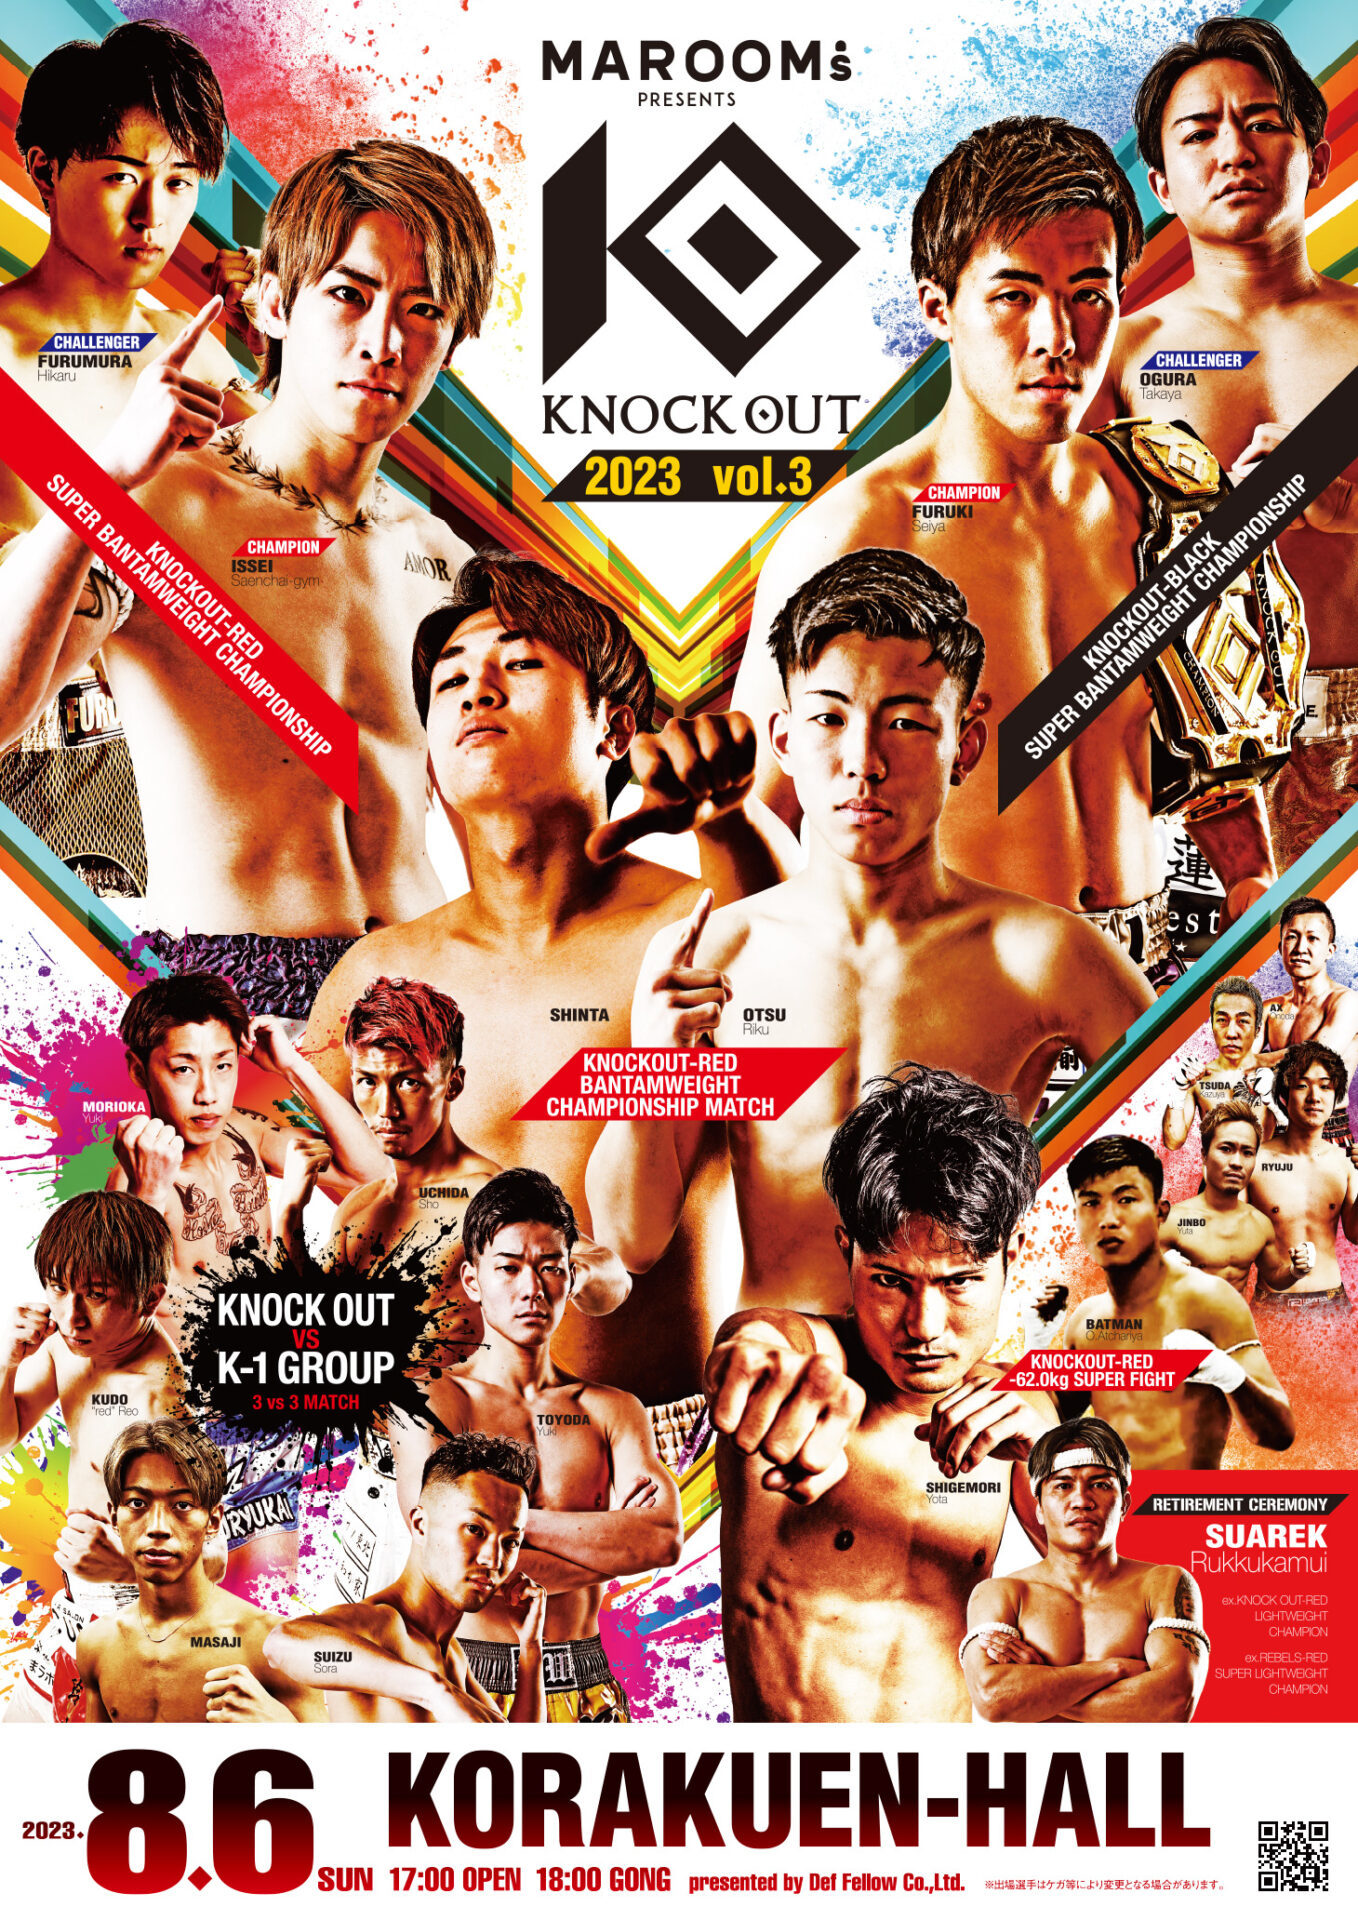 『MAROOMS presents KNOCK OUT 2023 vol.3』が8月6日（日）に後楽園ホールで開催される （C）Kockout